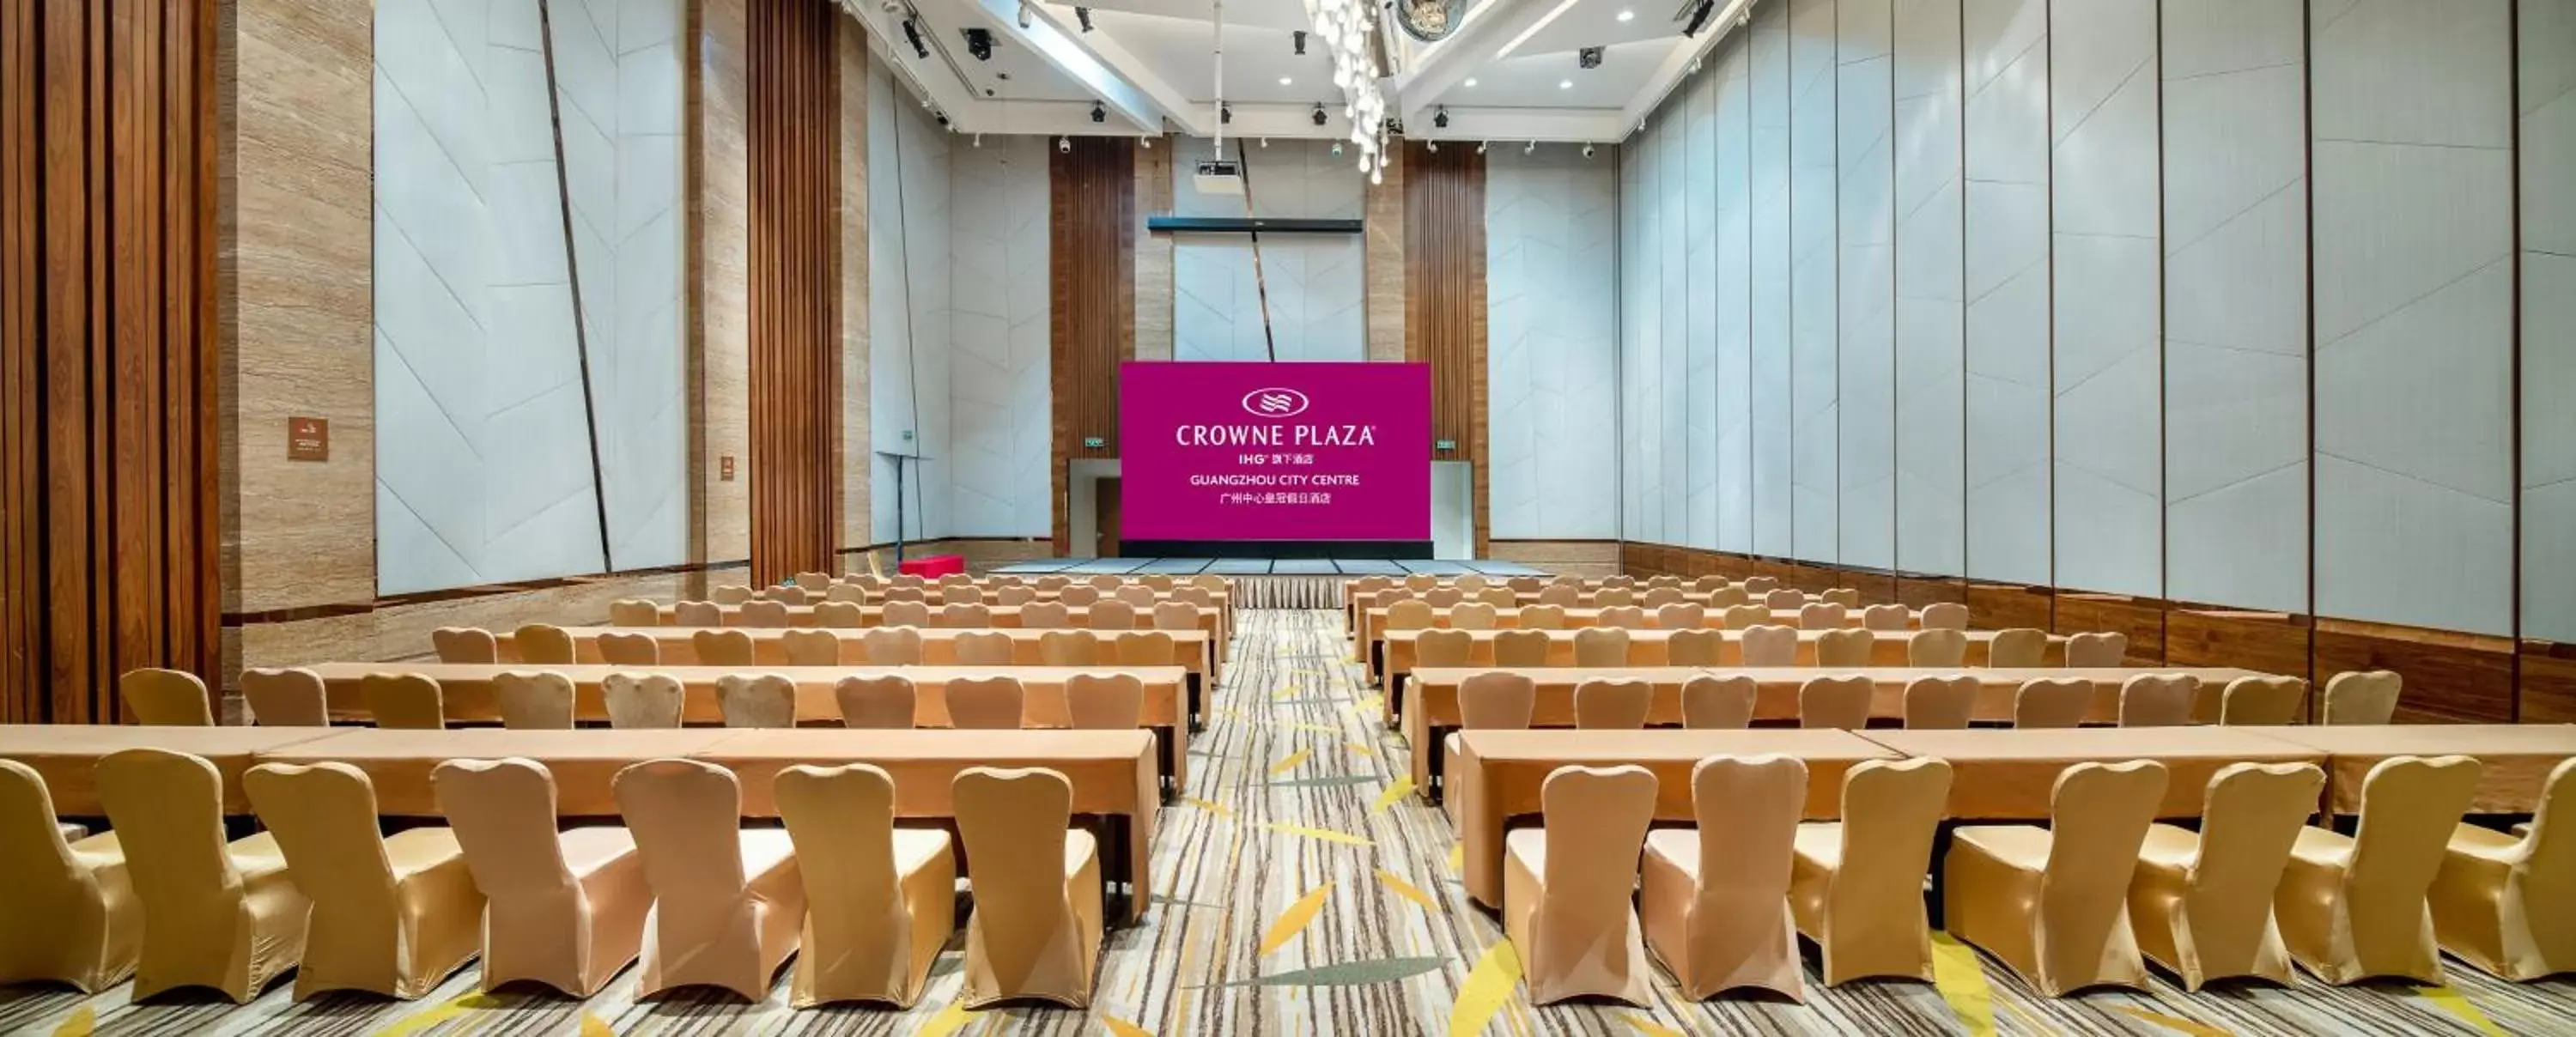 Meeting/conference room in Crowne Plaza Guangzhou City Centre, an IHG Hotel